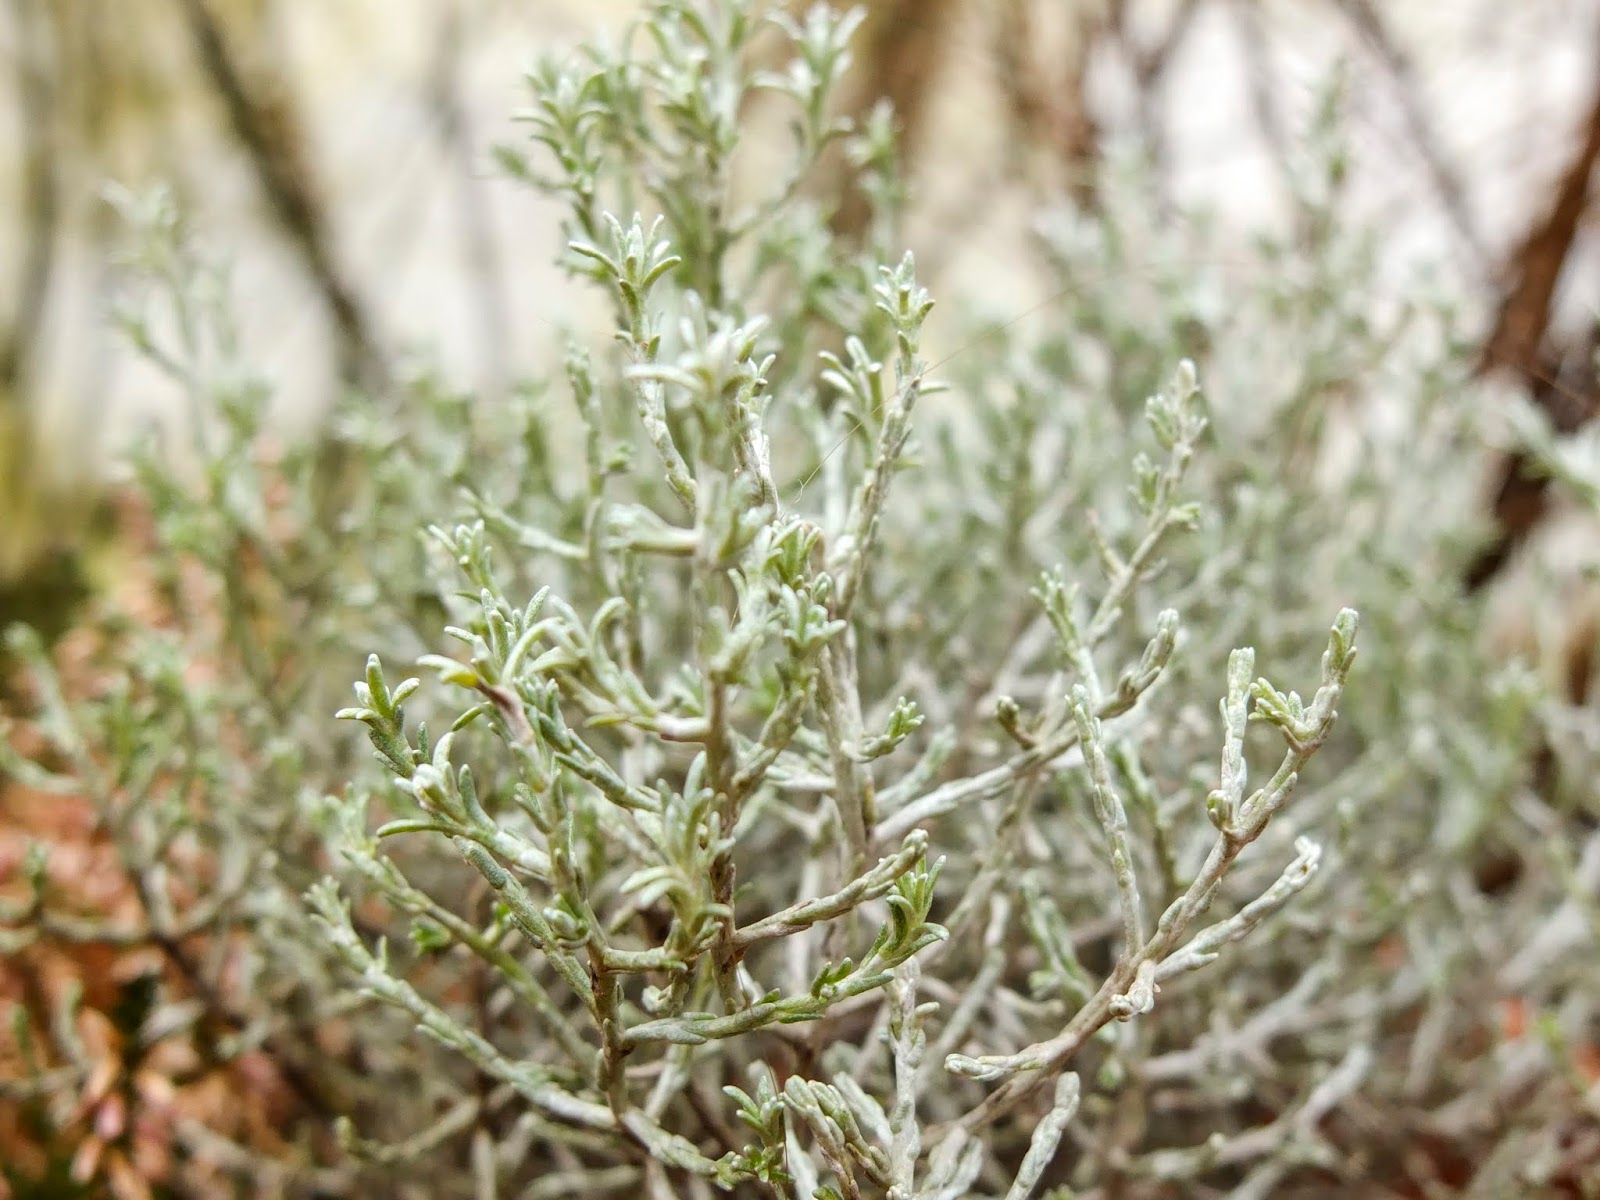 A close up of tiny silver, pale green leaves on a shrub.